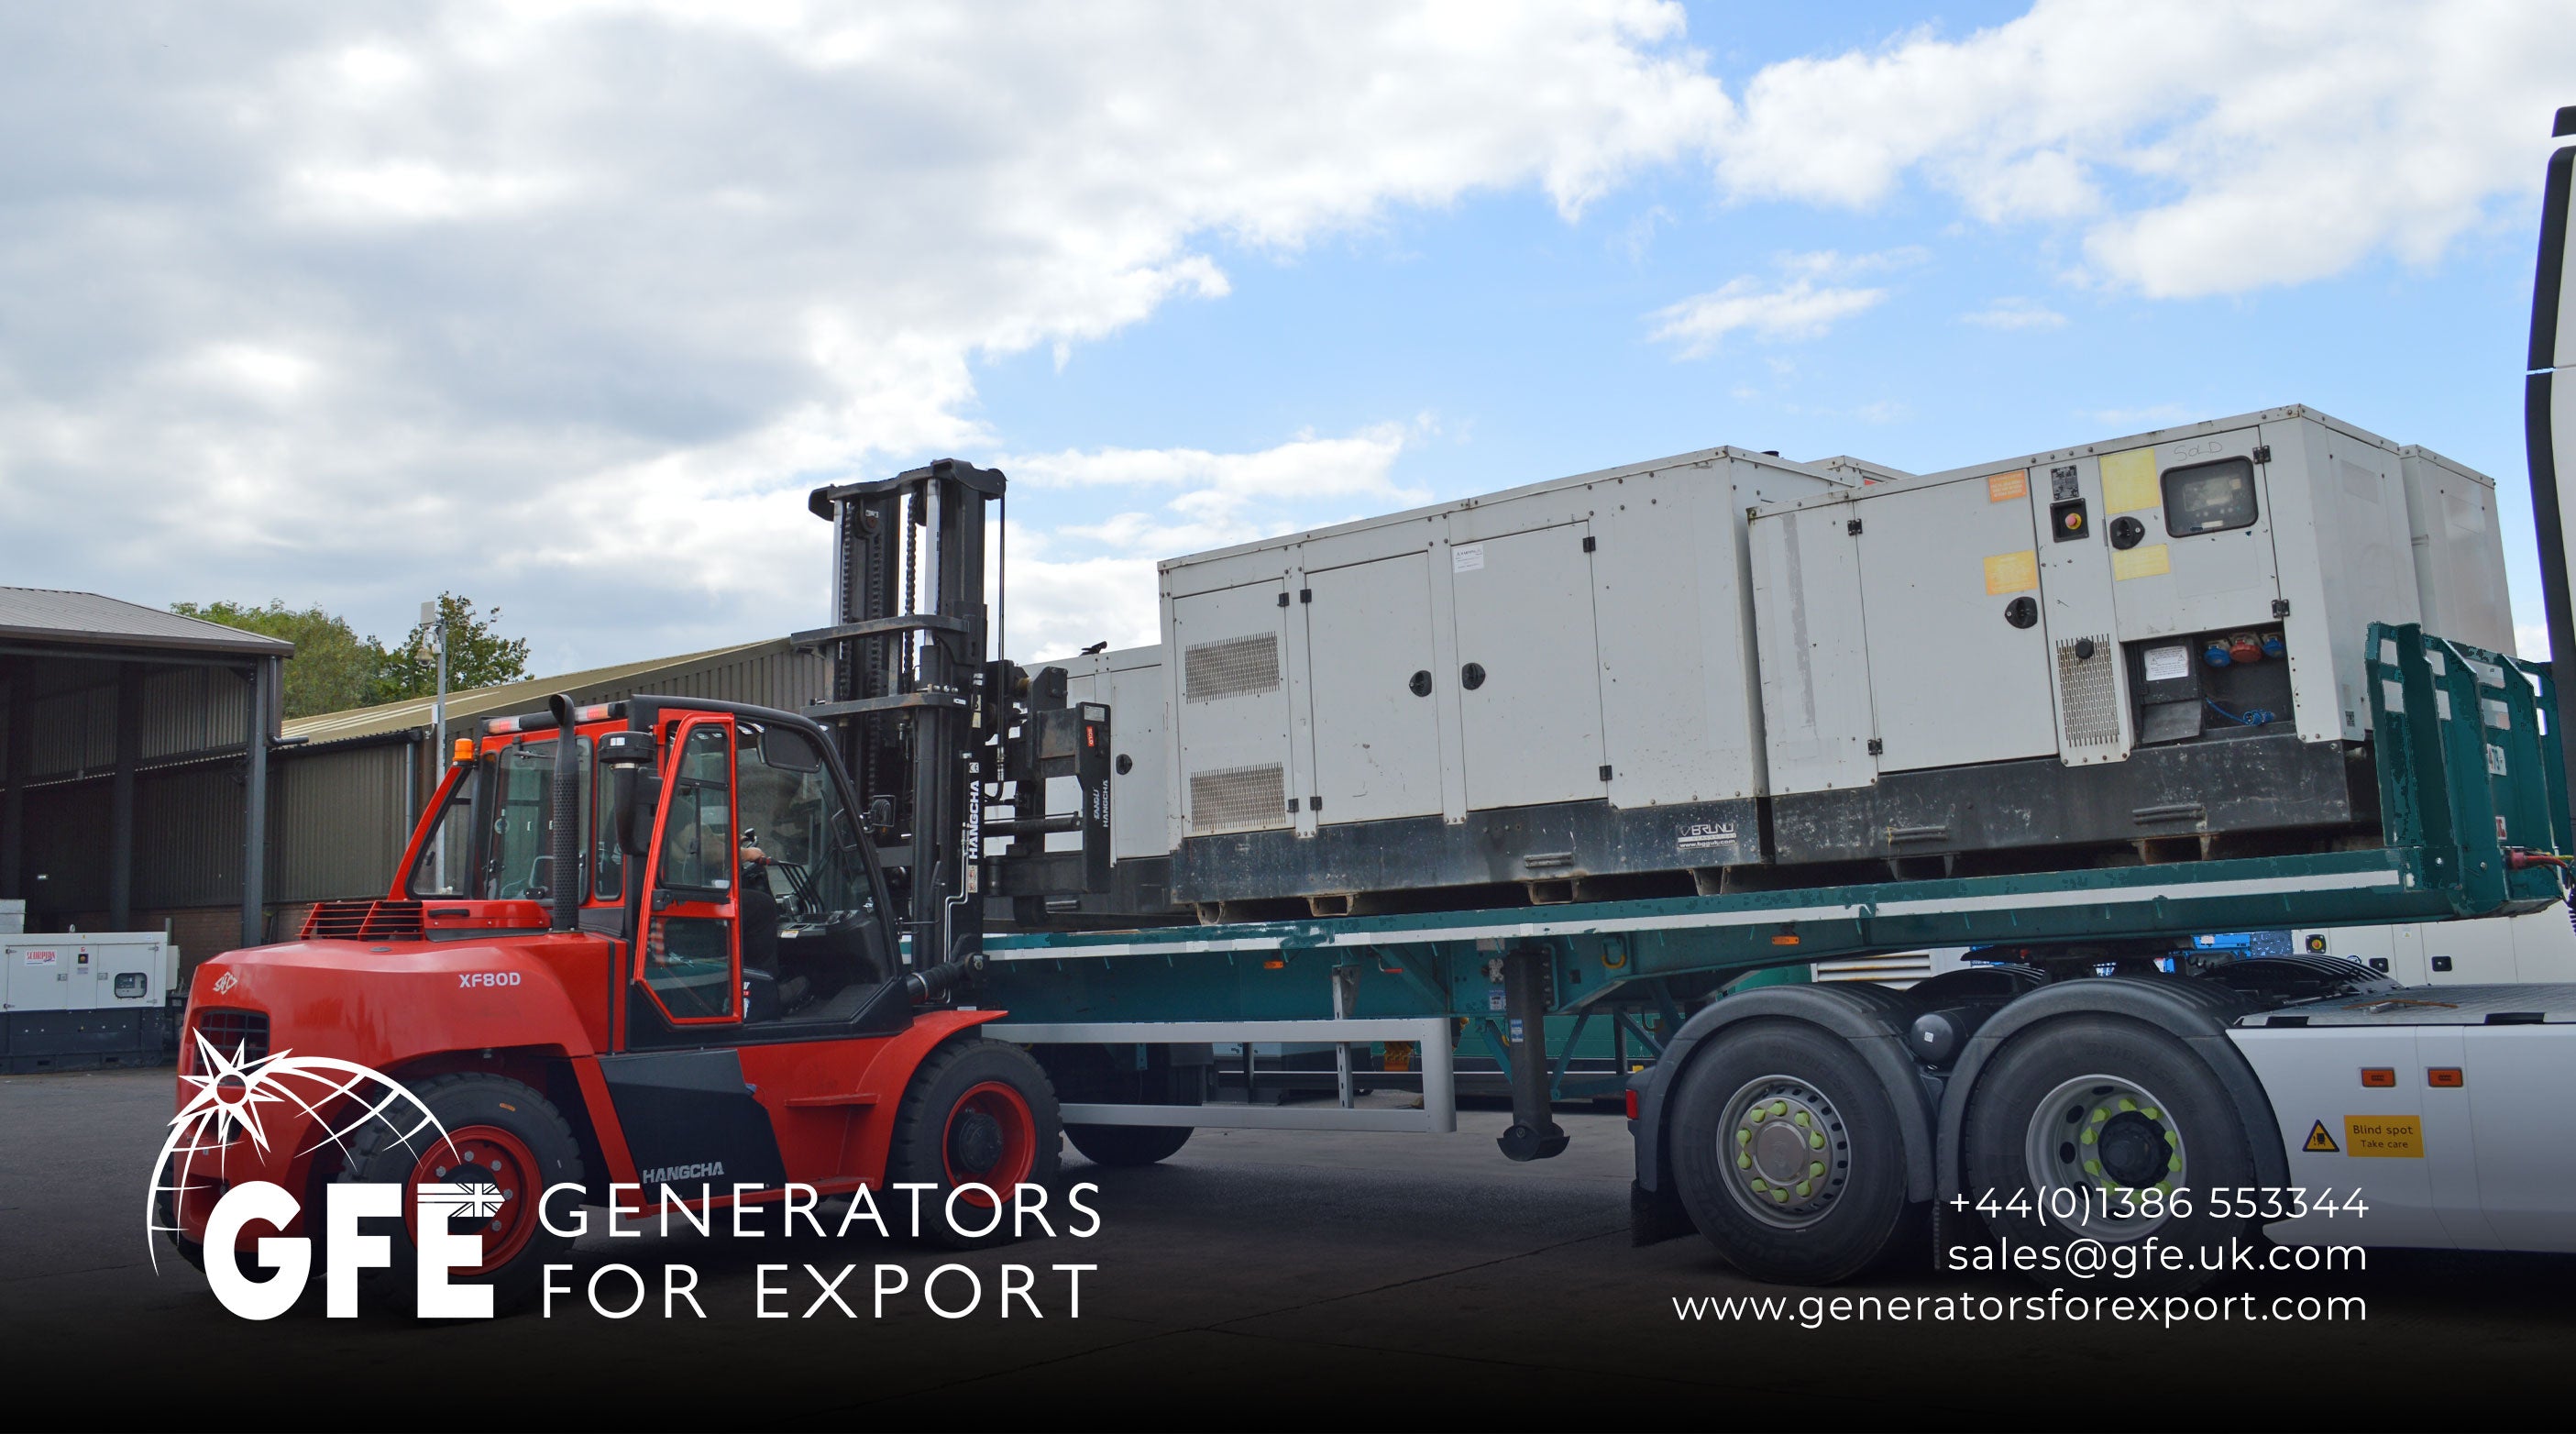 Who are Generators For Export?